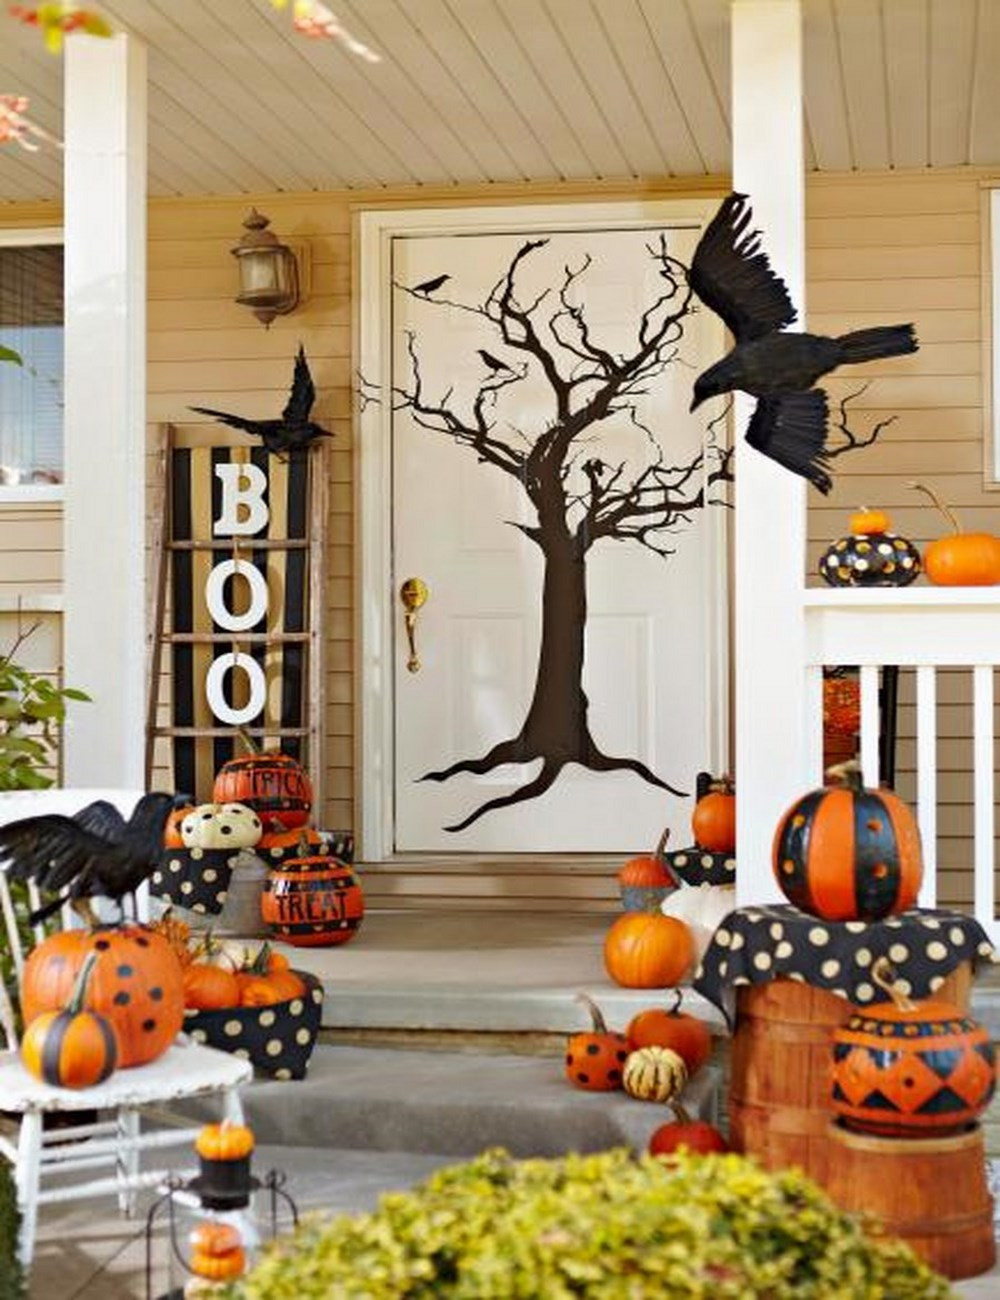 Halloween Front Porch
 Cute Halloween Front Porch Decorations to Greet Your Guests